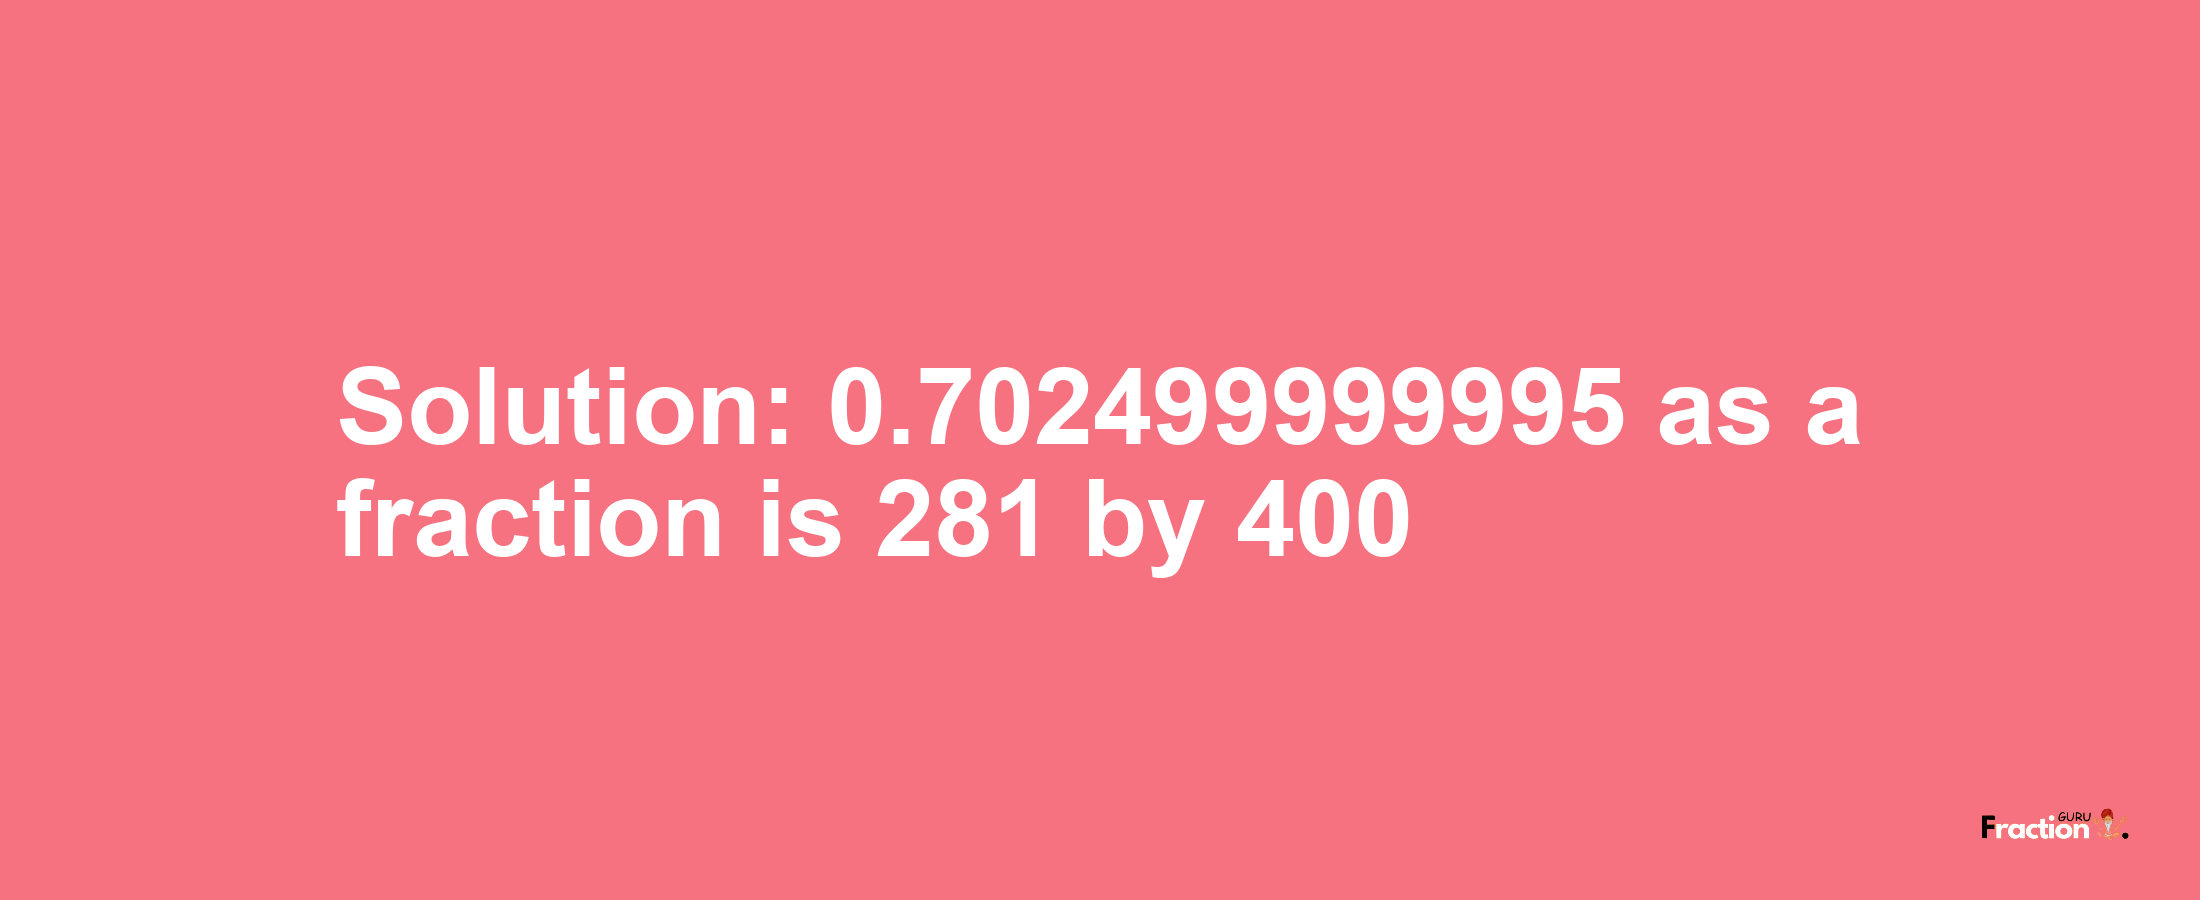 Solution:0.702499999995 as a fraction is 281/400